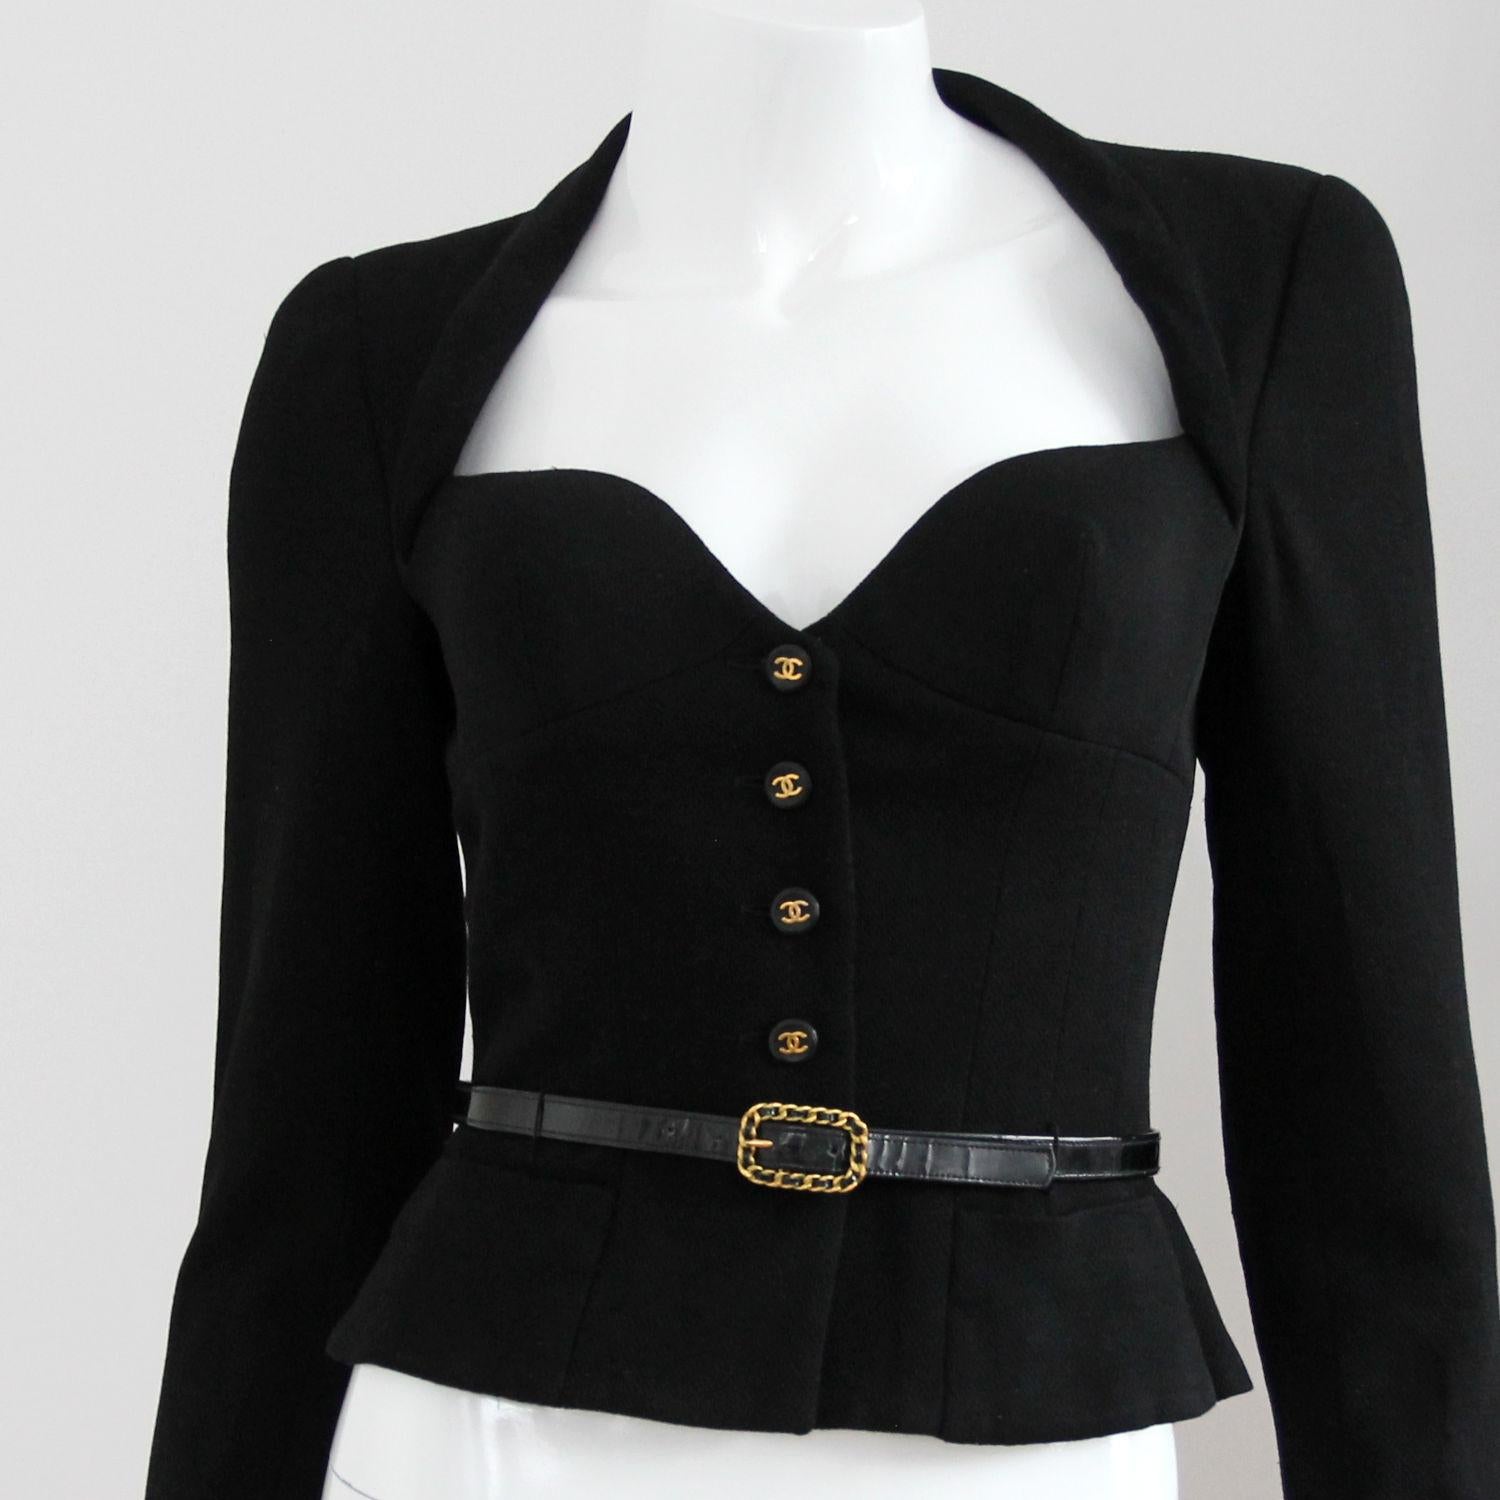 CHANEL 

1995. Luxurious blazer with patent leather belt by Chanel by Karl Lagerfeld. 

Rare collector's item. Buy Now Or Cry Later!
Get the Chanel model look of the 90s. 

The elegant blazer is in good condition (see photos). 
Minimal wear.

The